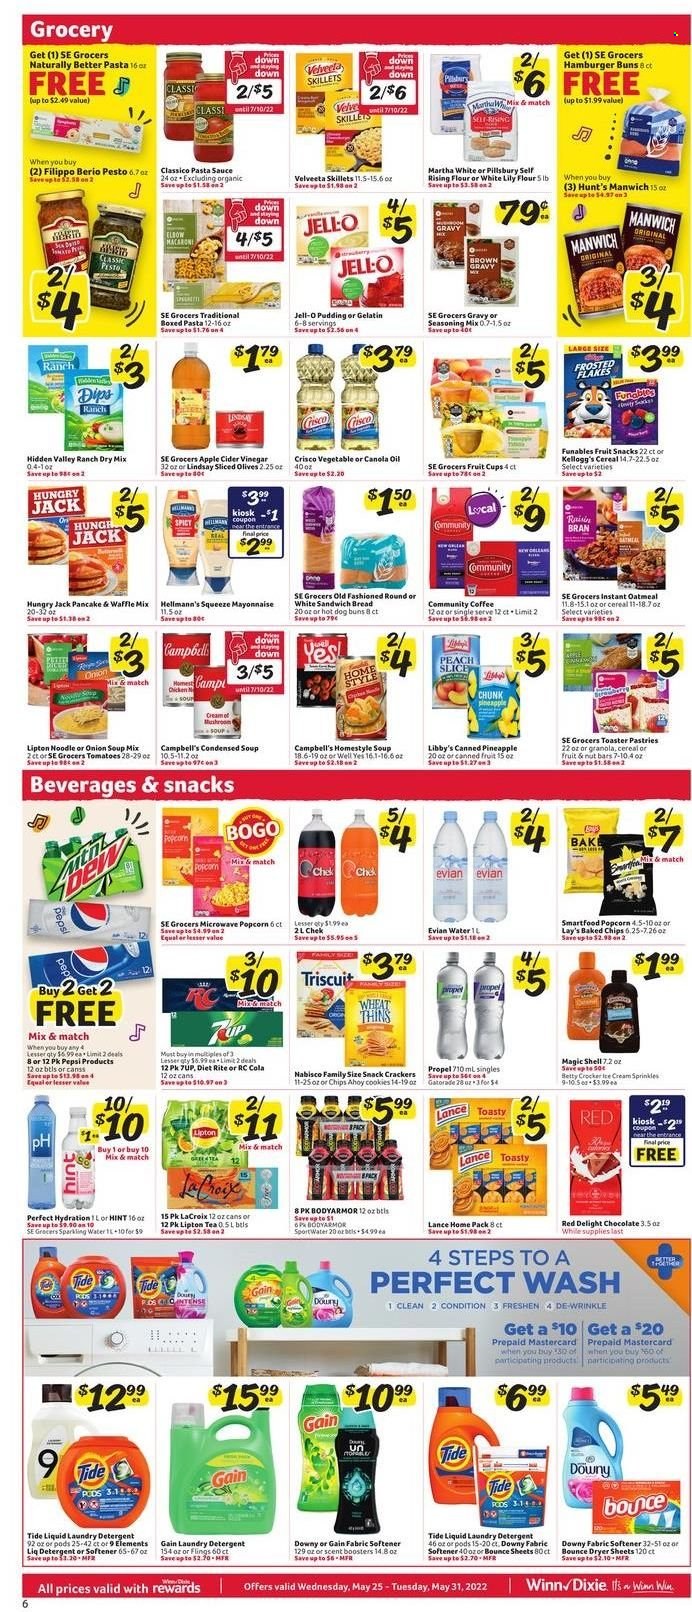 thumbnail - Winn Dixie Flyer - 05/25/2022 - 05/31/2022 - Sales products - bread, buns, burger buns, fruit cup, Campbell's, mushroom soup, pasta sauce, onion soup, soup mix, macaroni, condensed soup, soup, sauce, pancakes, Pillsbury, noodles, instant soup, pudding, sour cream, mayonnaise, Hellmann’s, ice cream, cookies, crackers, Kellogg's, fruit snack, chips, Lay’s, Smartfood, Thins, popcorn, Crisco, flour, self rising flour, oatmeal, Jell-O, olives, Manwich, canned fruit, granola, nut bar, Frosted Flakes, Raisin Bran, spice, pesto, Classico, apple cider vinegar, canola oil, oil, Pepsi, Lipton, 7UP, Gatorade, sparkling water, Evian, tea, coffee, L'Or, detergent, Gain, Tide, fabric softener, laundry detergent, Bounce, dryer sheets, scent booster, Downy Laundry. Page 6.